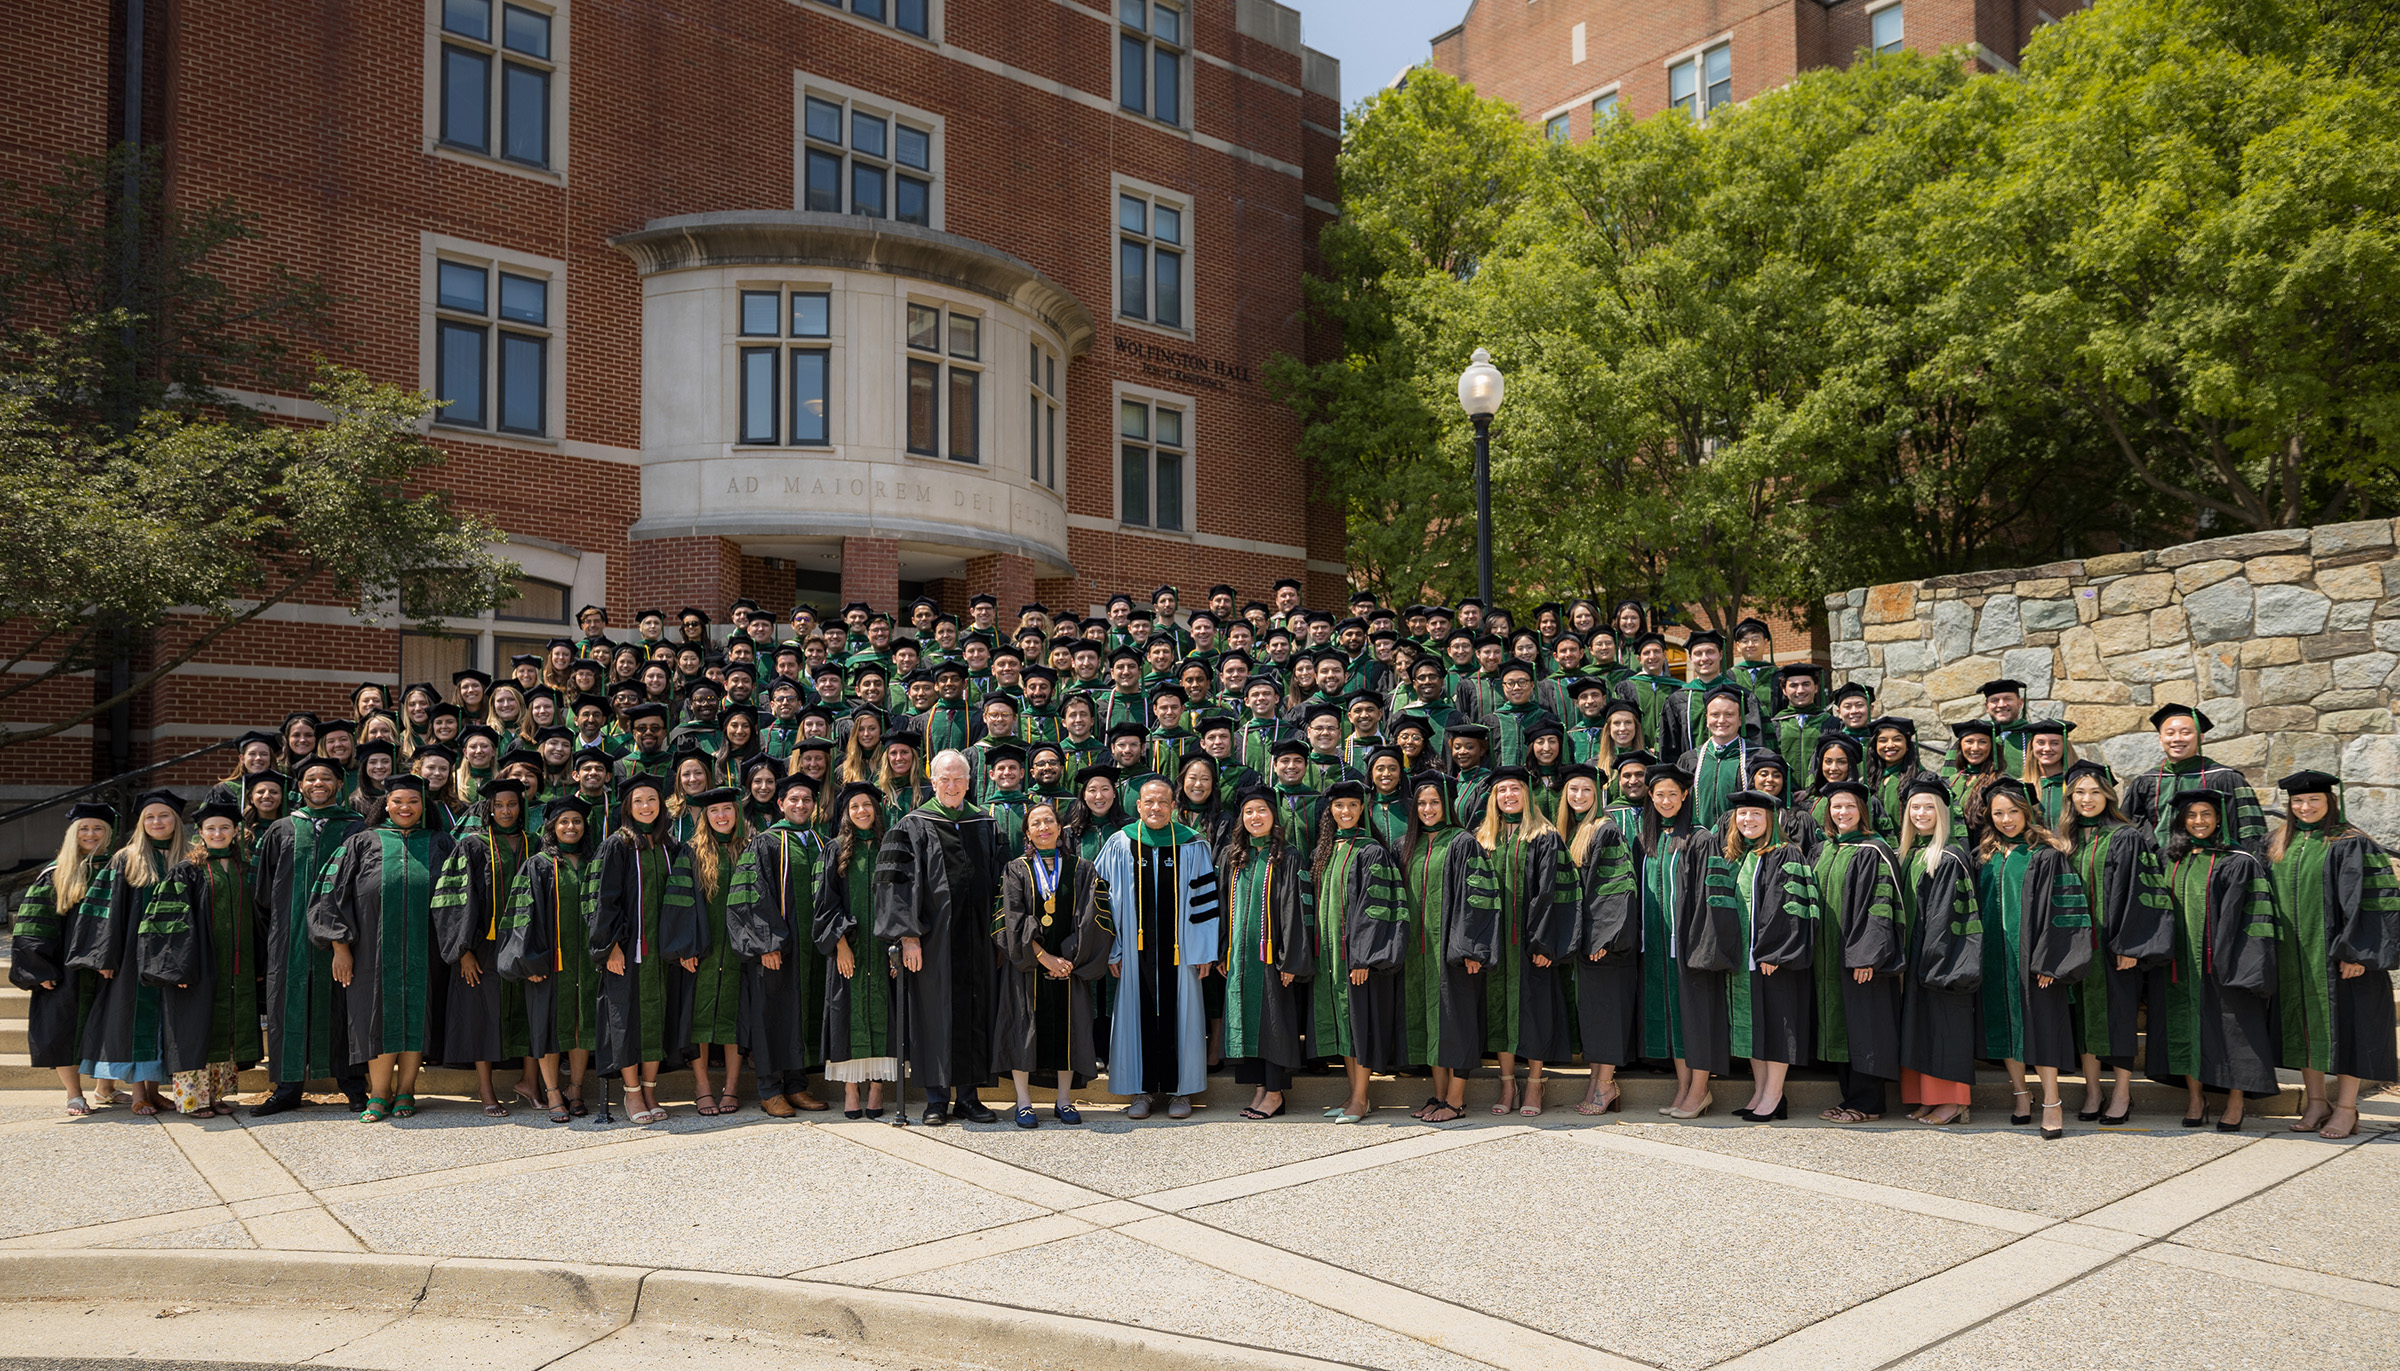 The 200 members of the graduating class of 2023 stand together dressed in academic regalia on the steps outside Wolfington Hall on campus